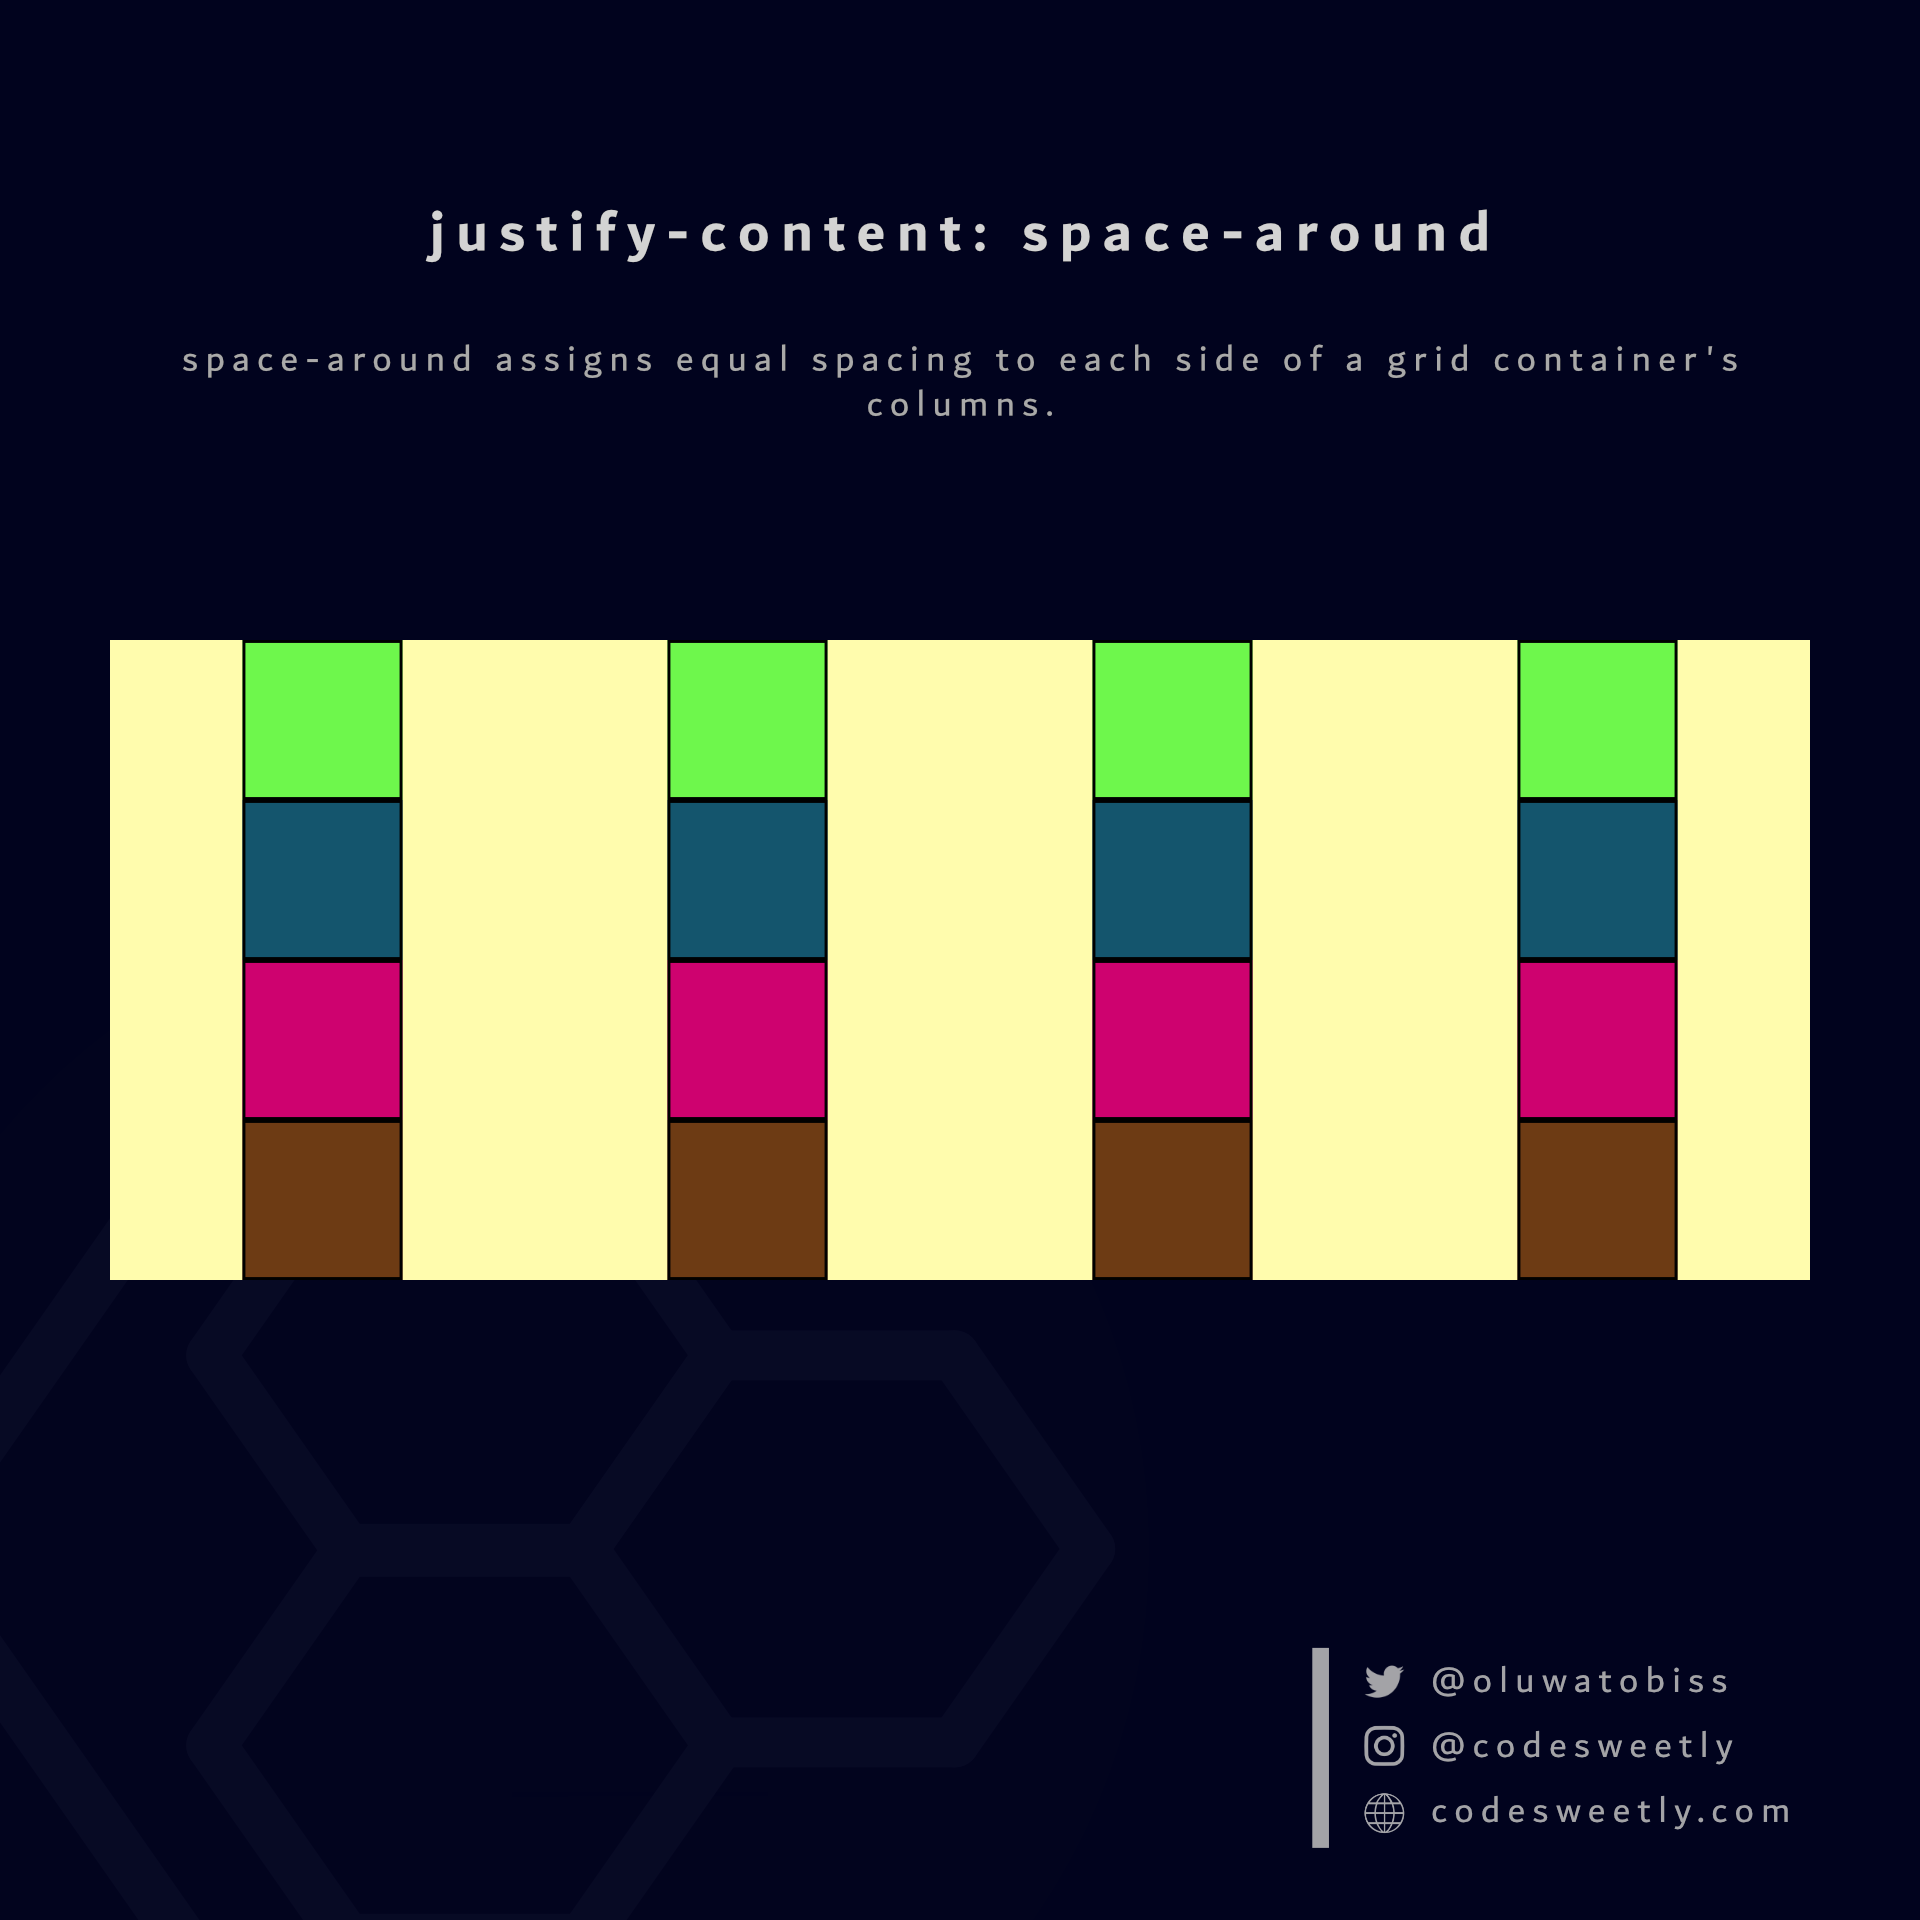 Illustration of justify-content's space-around value in CSS Grid